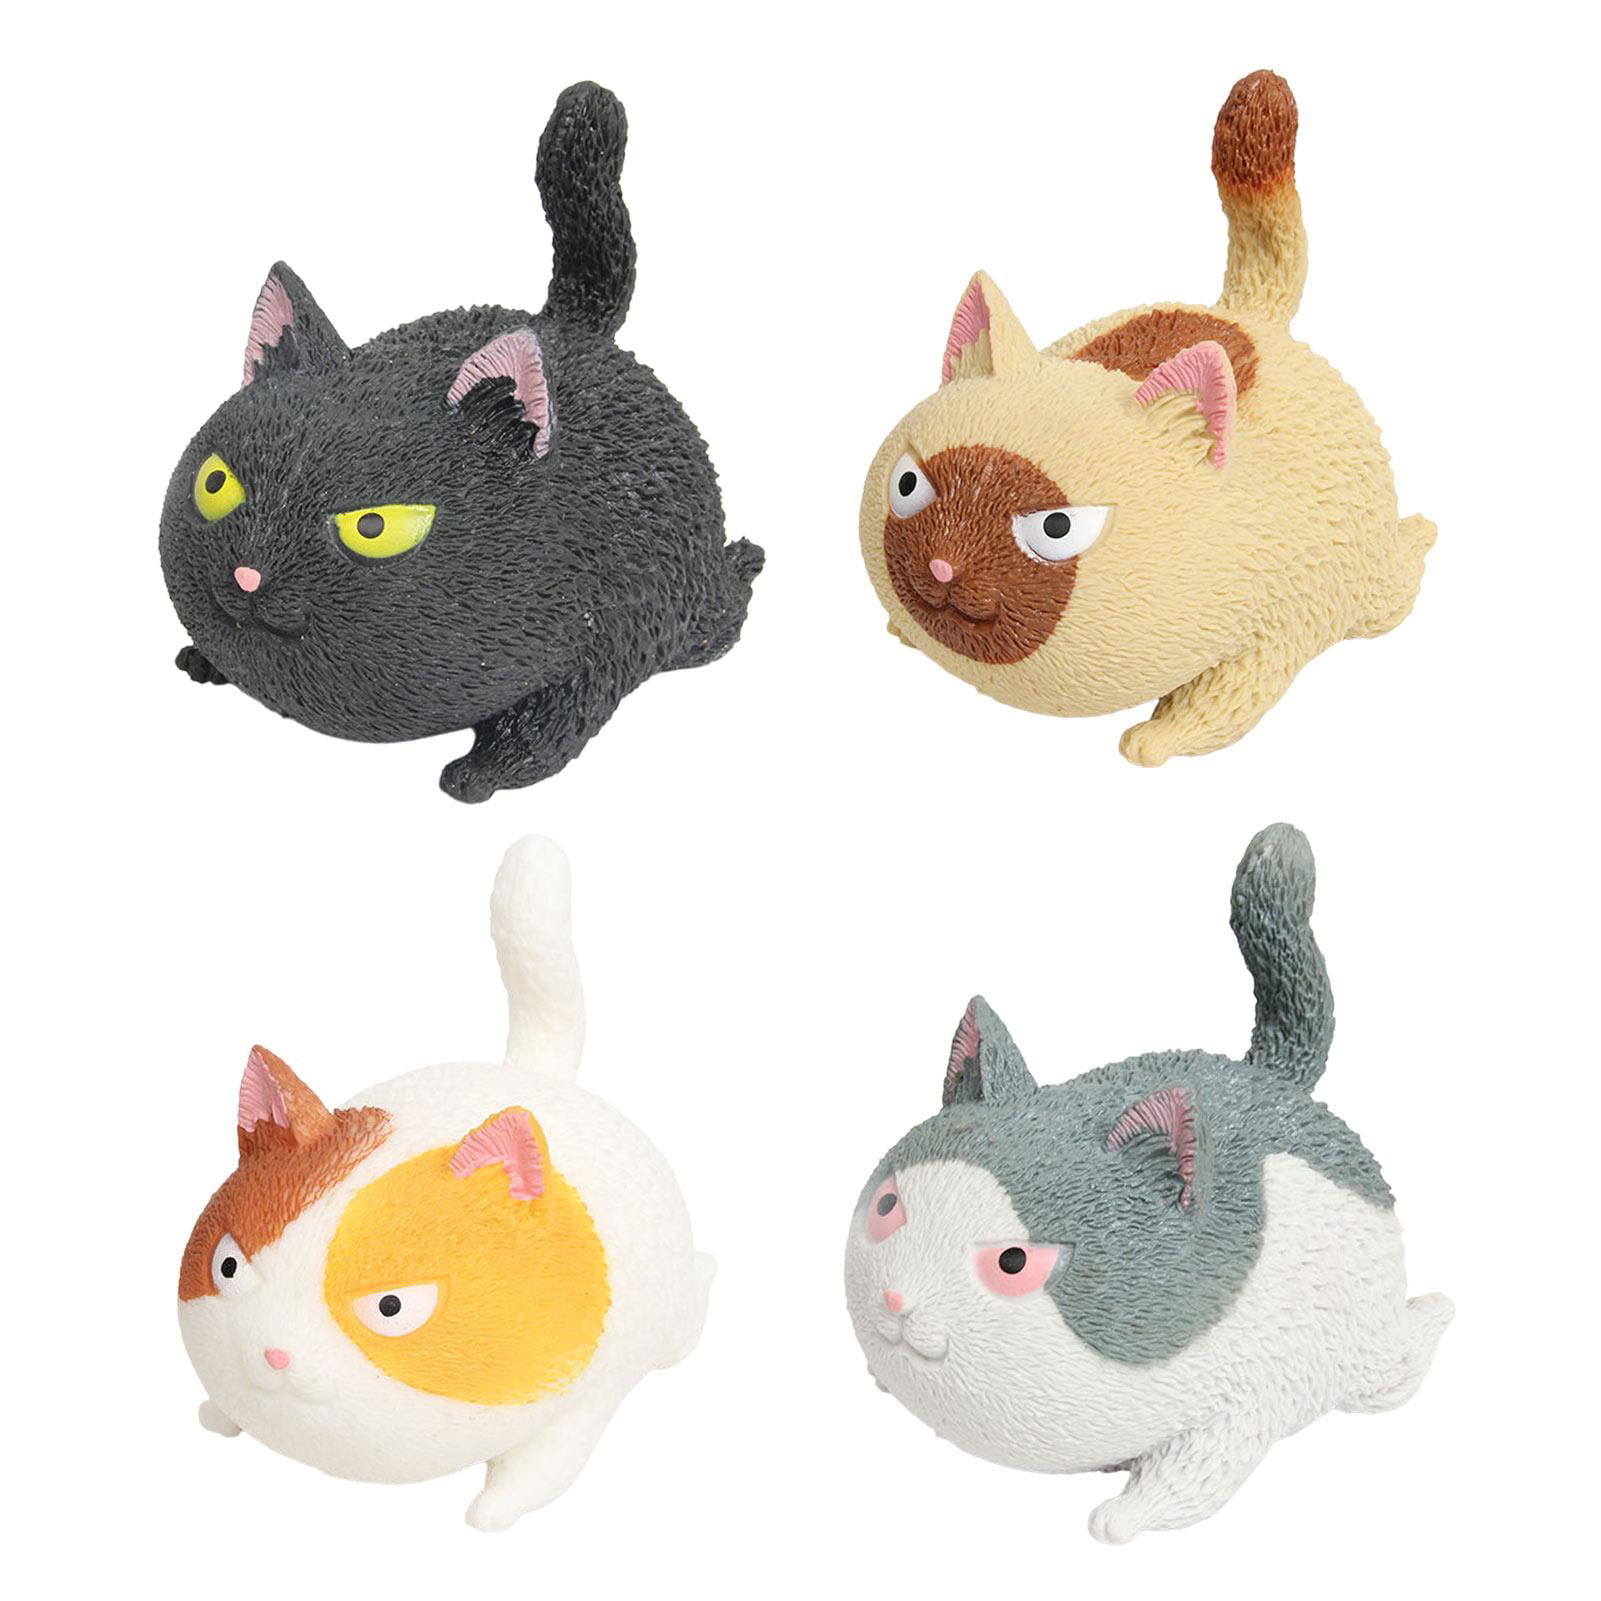 Cute Angry Cat Squeeze Stretchy Doll Squishy Fidget Healing Balls Stress Toy 